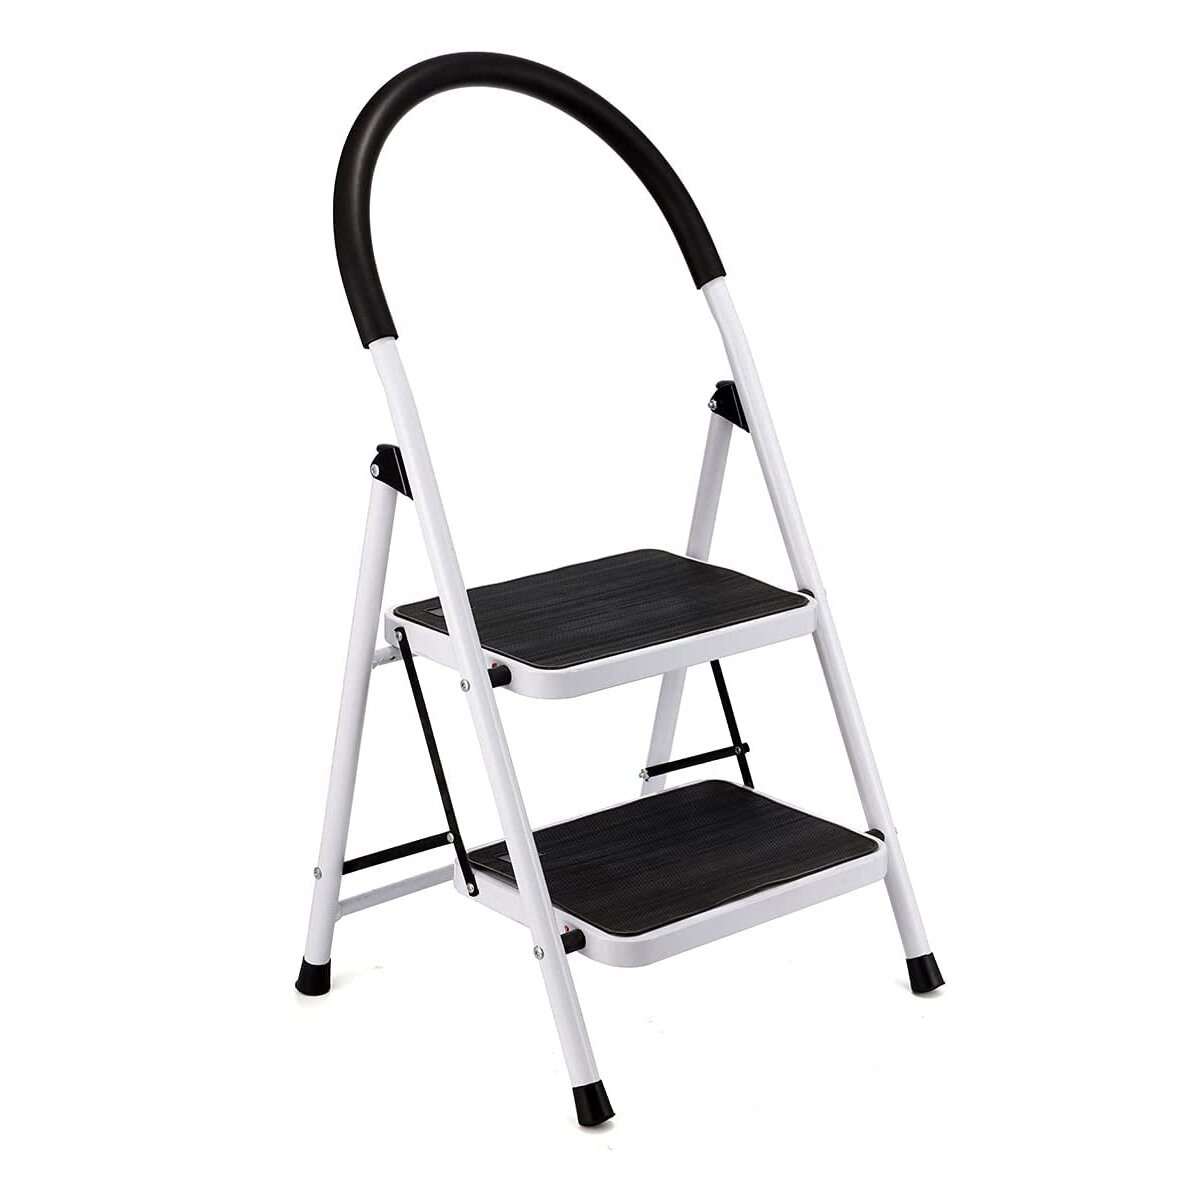 Image of 2 Step Ladder Folding Step Stool with Rubber Wide Anti-Slip Pedal Sturdy Steel Ladder Steel Ladder Hold Up to 330lbs for